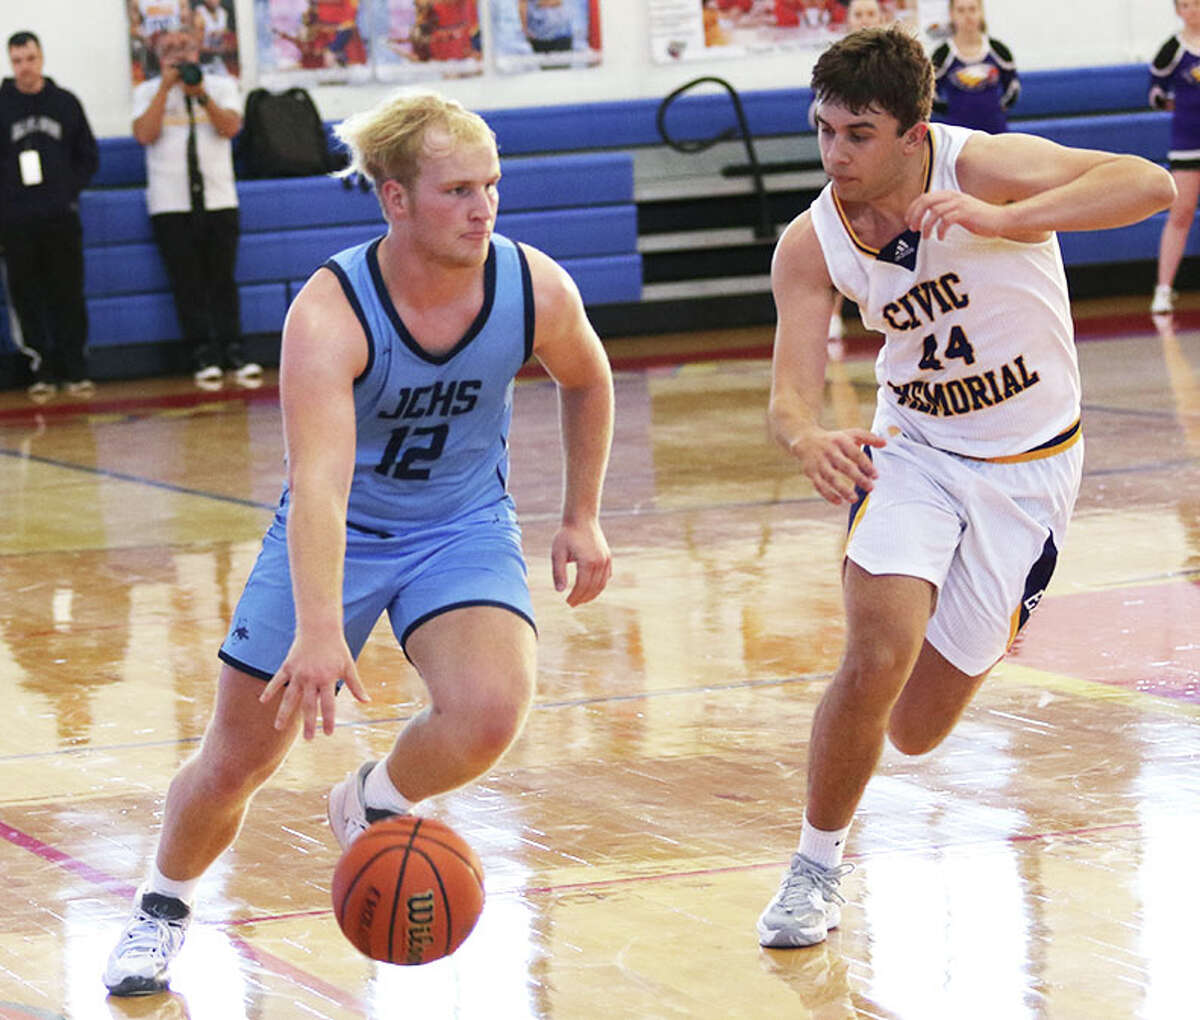 Jersey's Tanner Brunaugh (left) led his team with 16 points, inclduing four 3-point baskets, in its win over East Alton-Wood river Wednesday in Jerseyville. He is shown driving against CM's Dalton Buhs earlier this season in the Hoopsgiving Classic in Roxana. The Panthers will face CM again on Friday at Havens Gym.